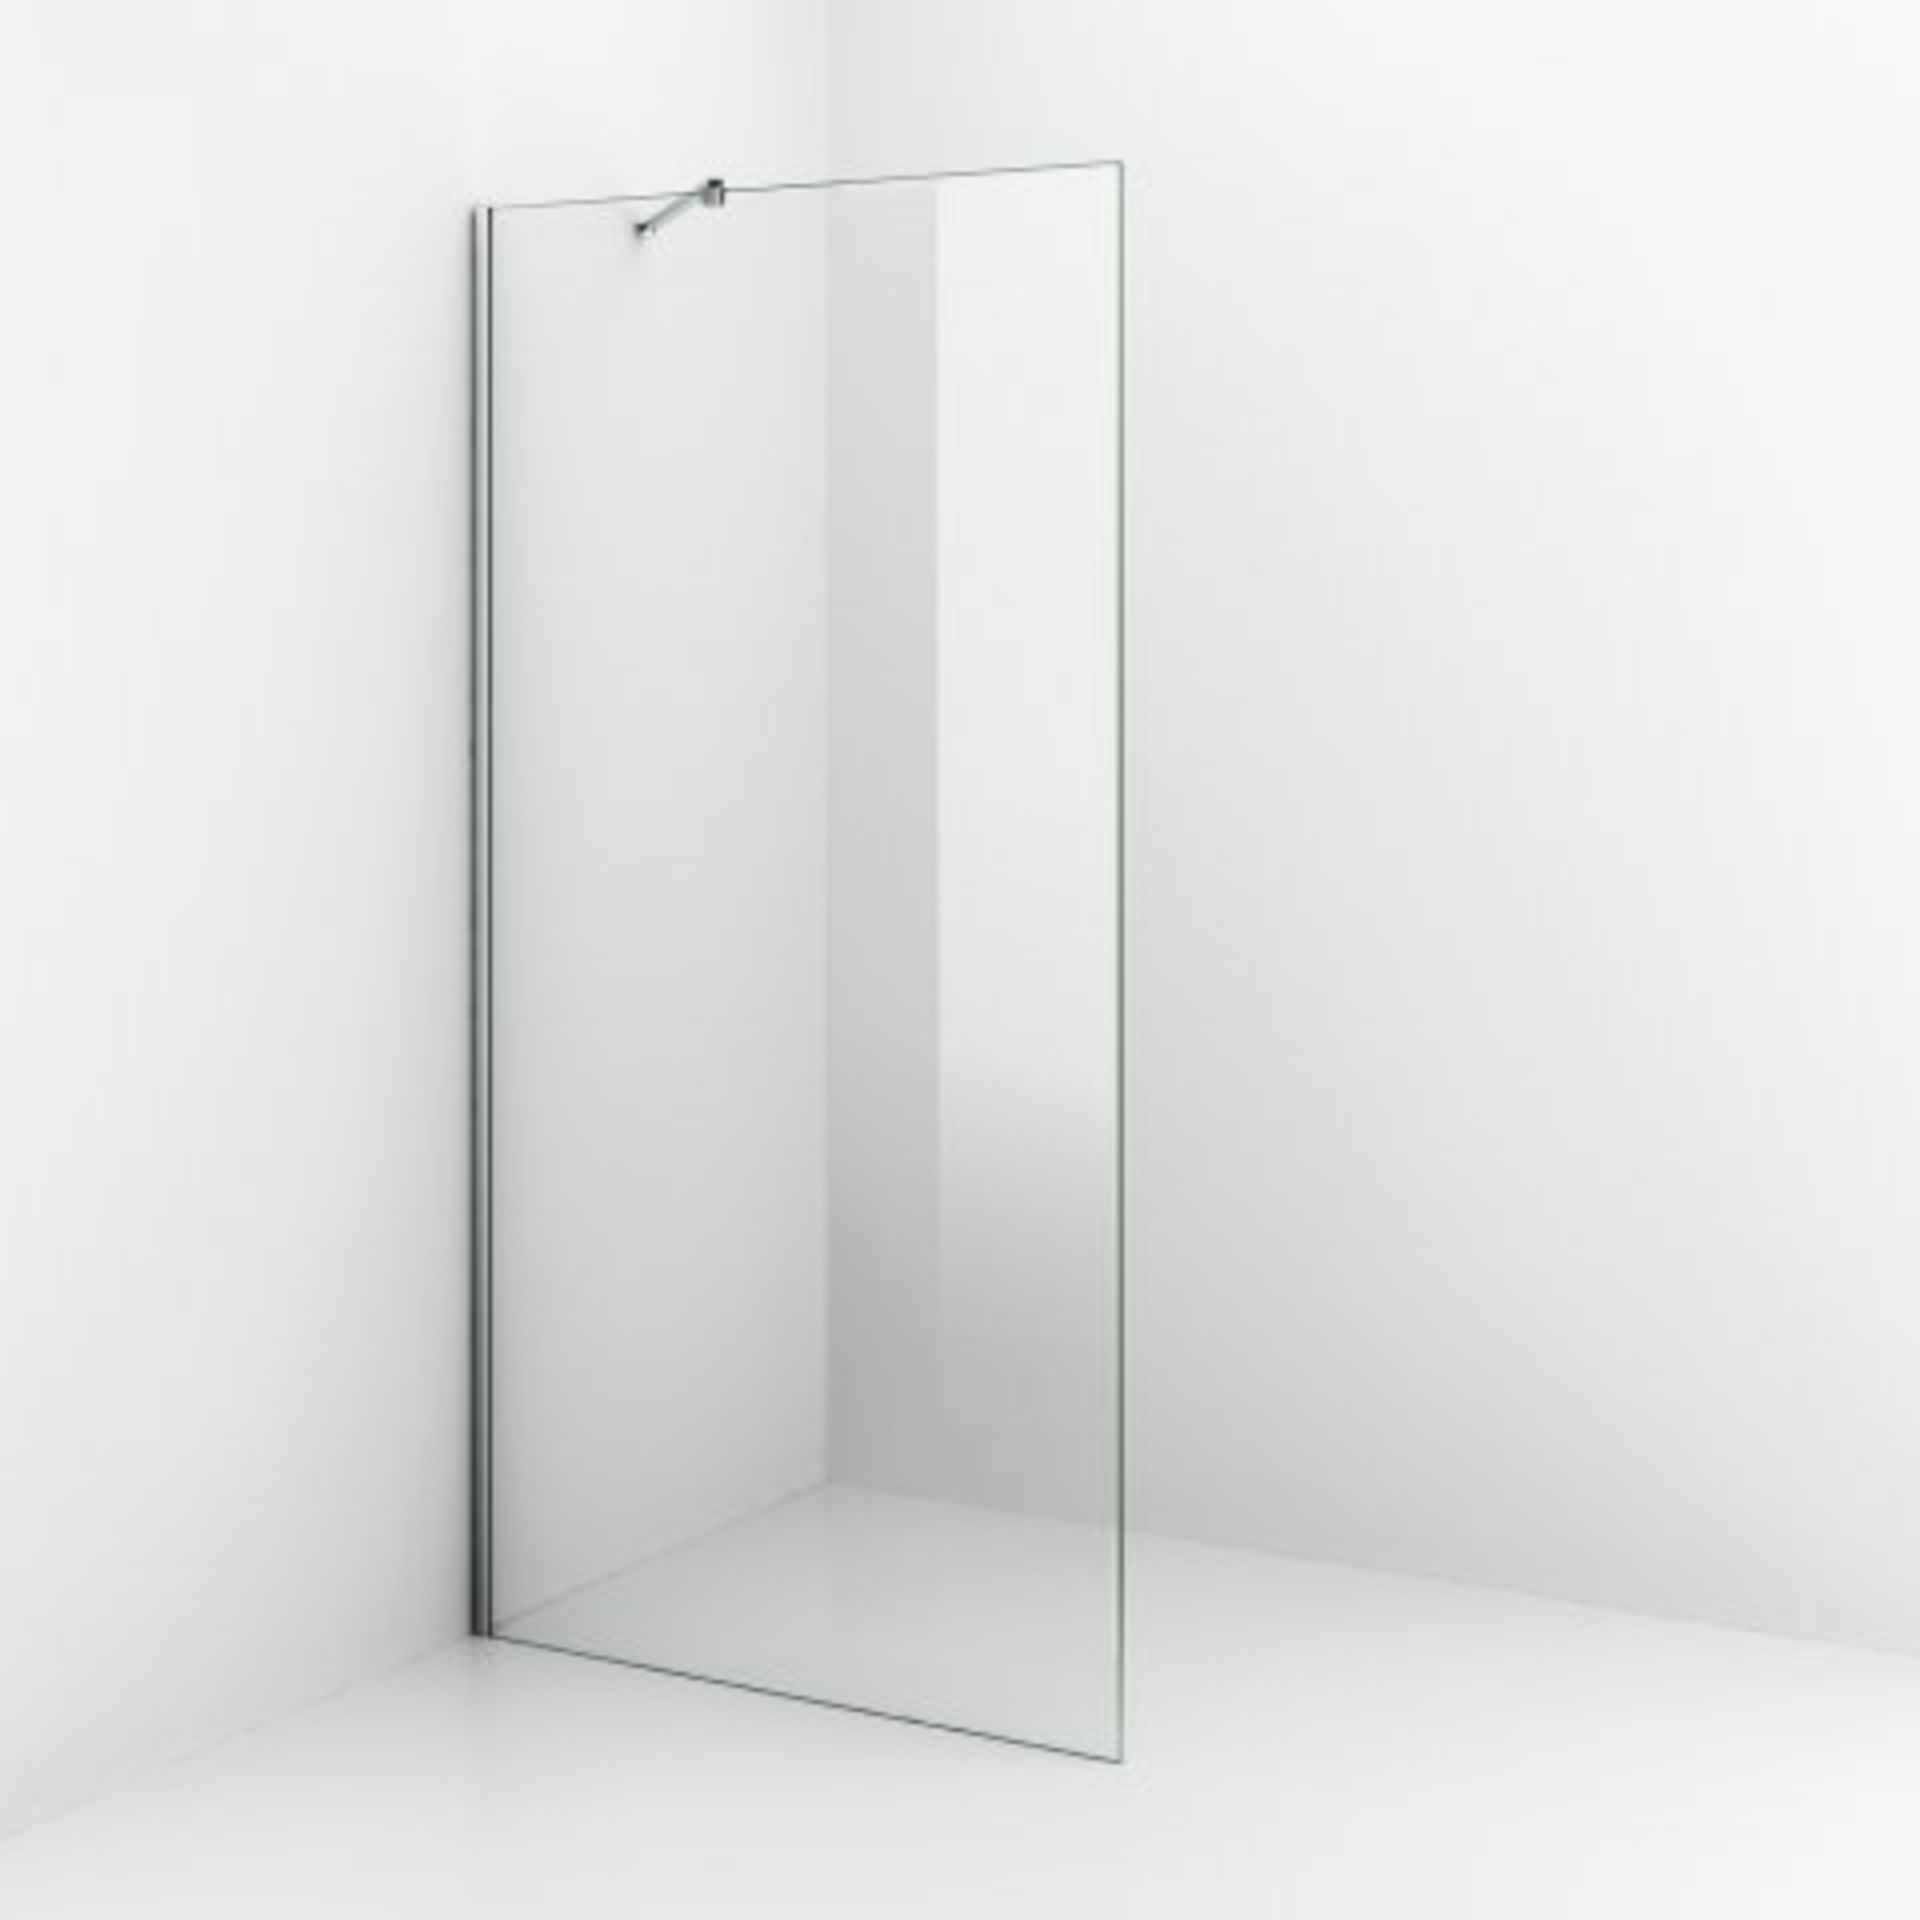 (I141) 1000mm - 8mm - Premium EasyClean Wetroom Panel. RRP £499.99. Fully waterproof tested Polished - Image 3 of 3